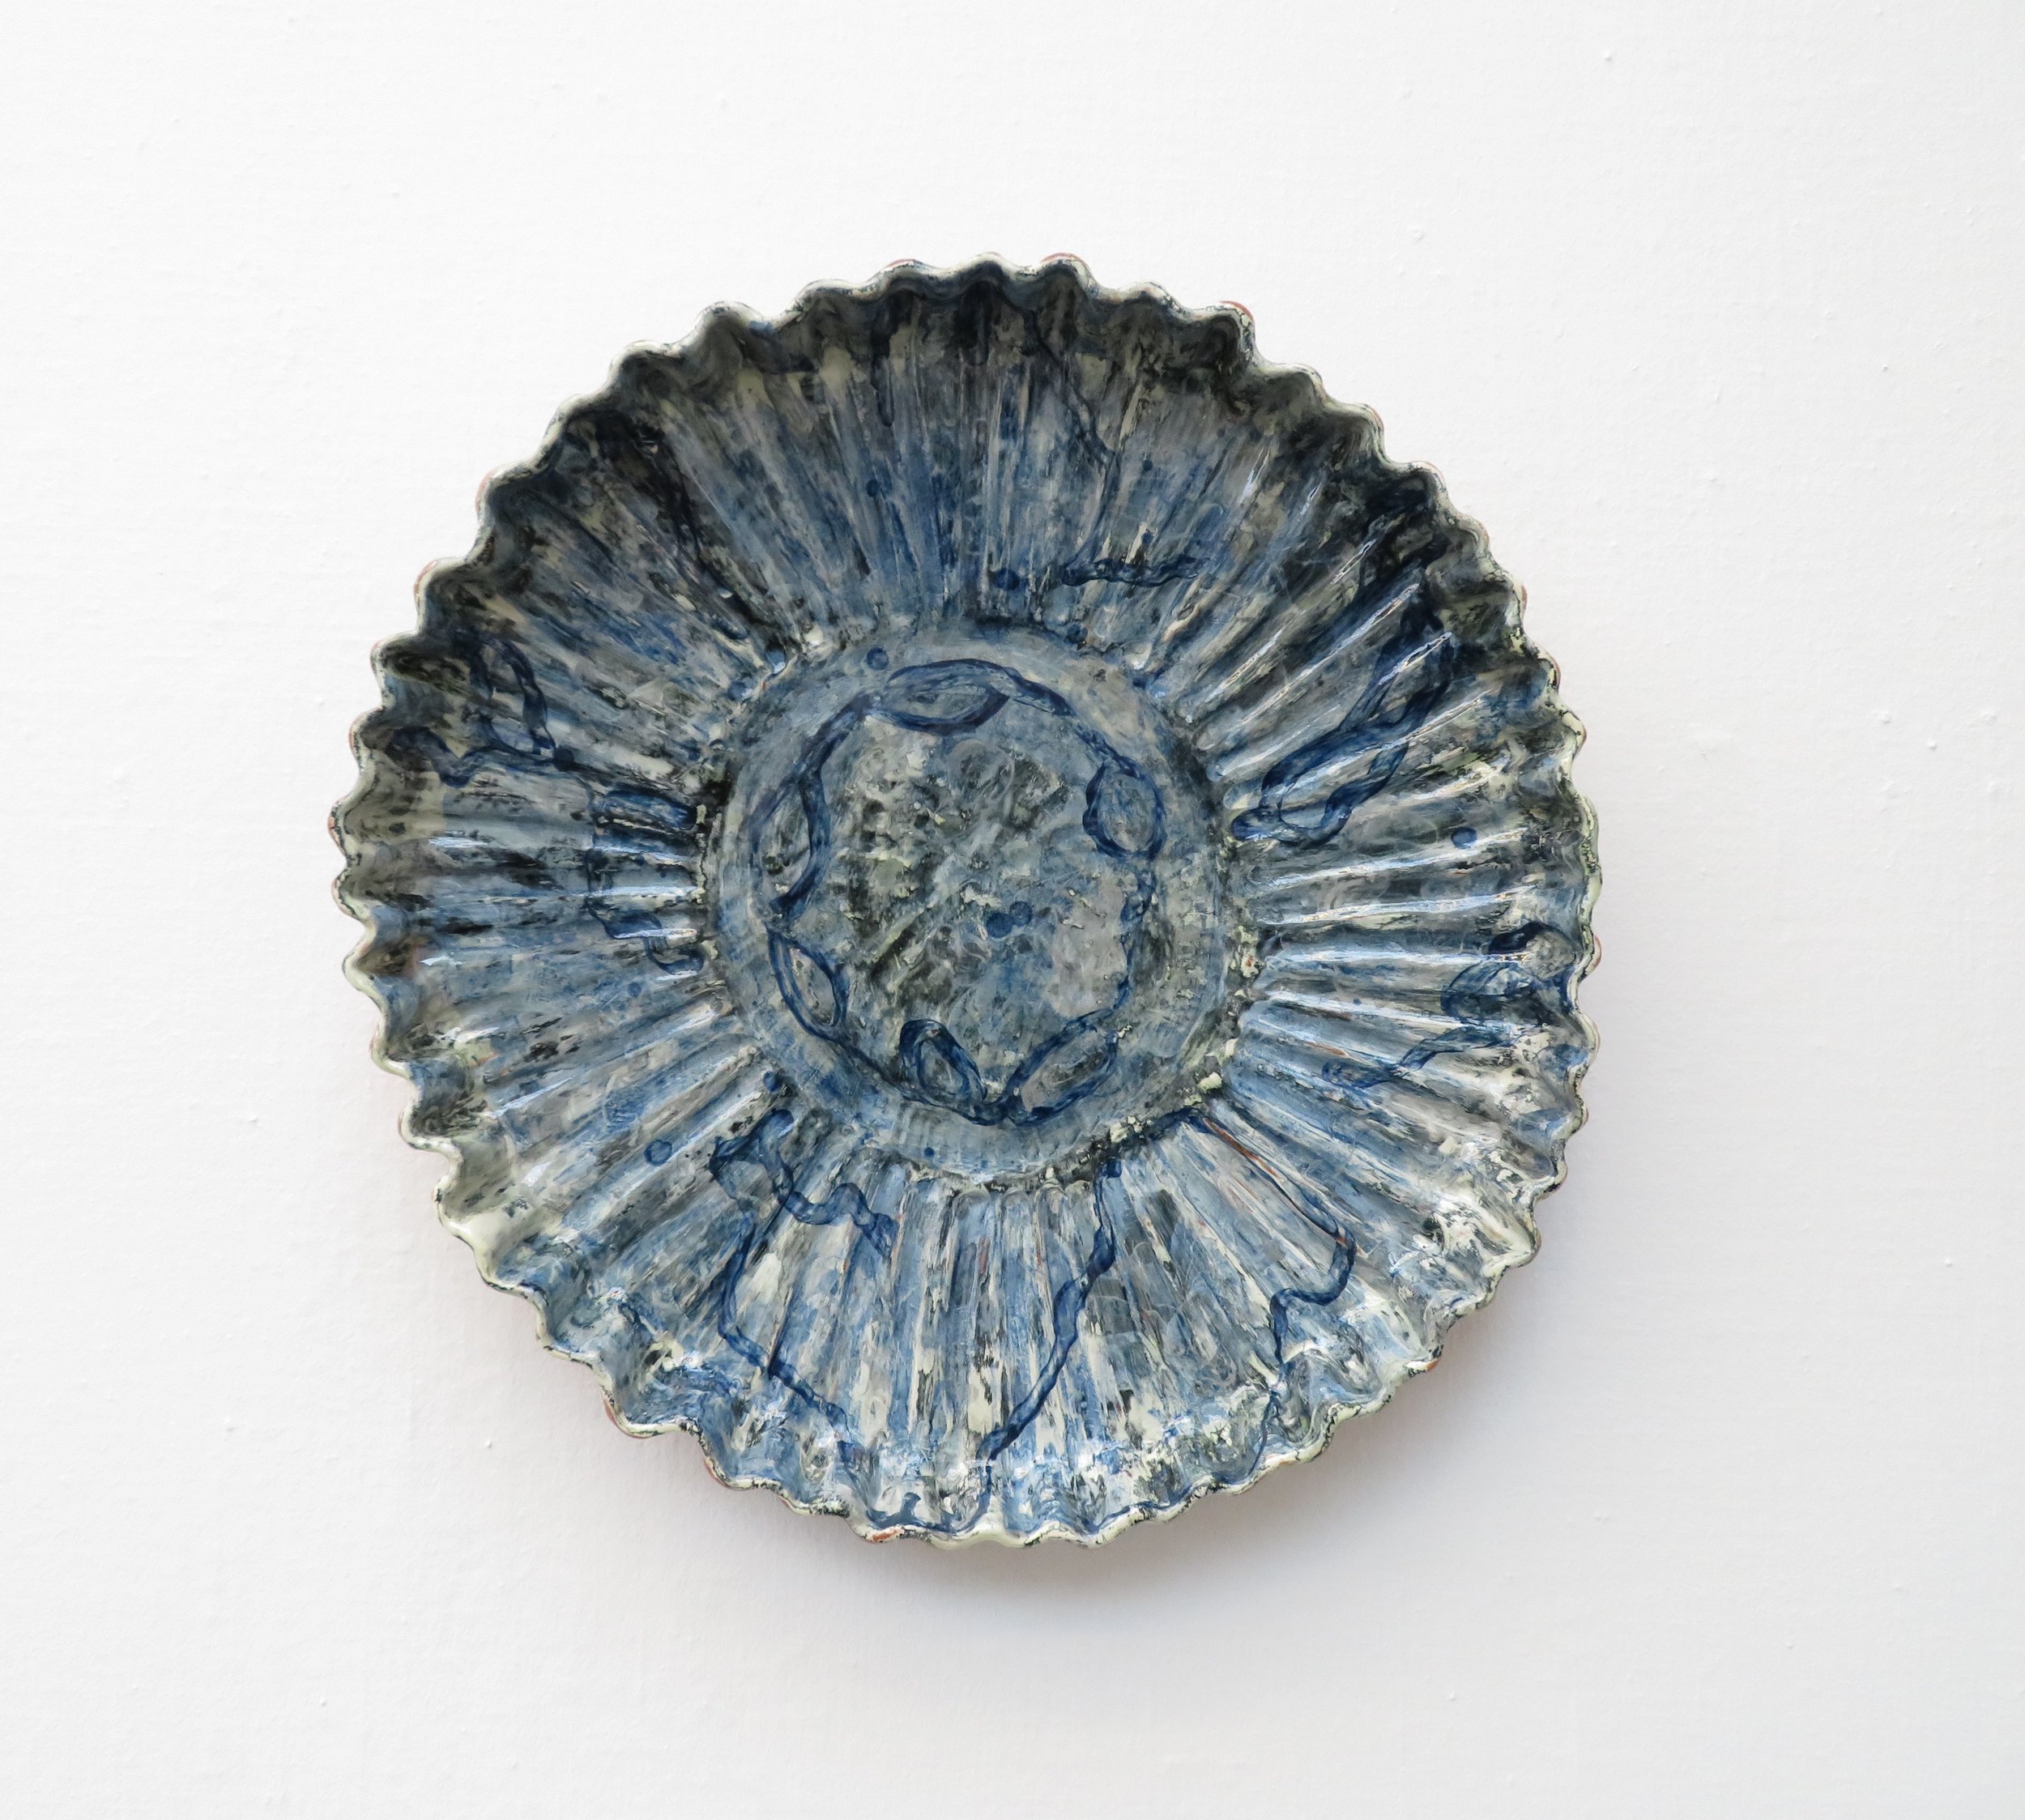   Deep blue ornamental plate I, 2018  | Earthenware clay with slip decoration.   Photo credit: Courtesy of Galleri Format Oslo 